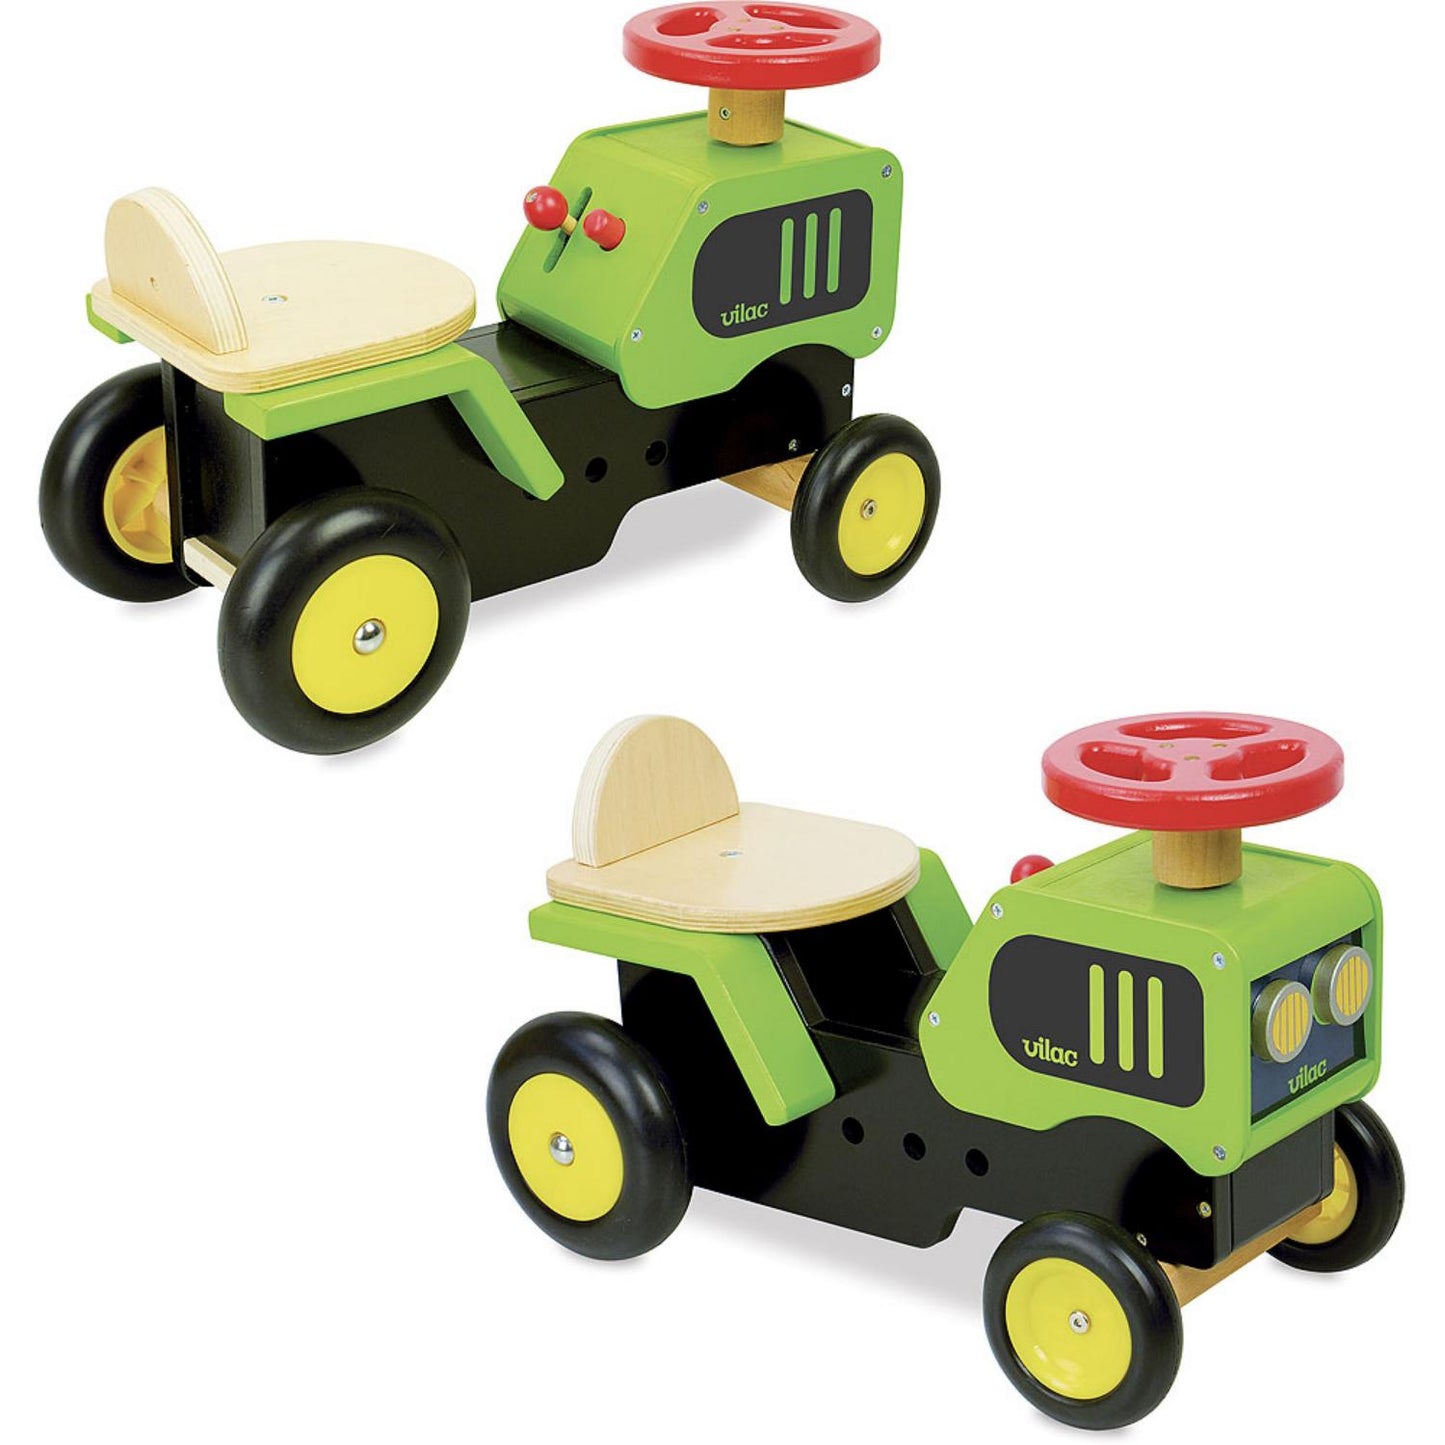 Ride On Tractor | Baby & Toddler Activity Wooden Toy